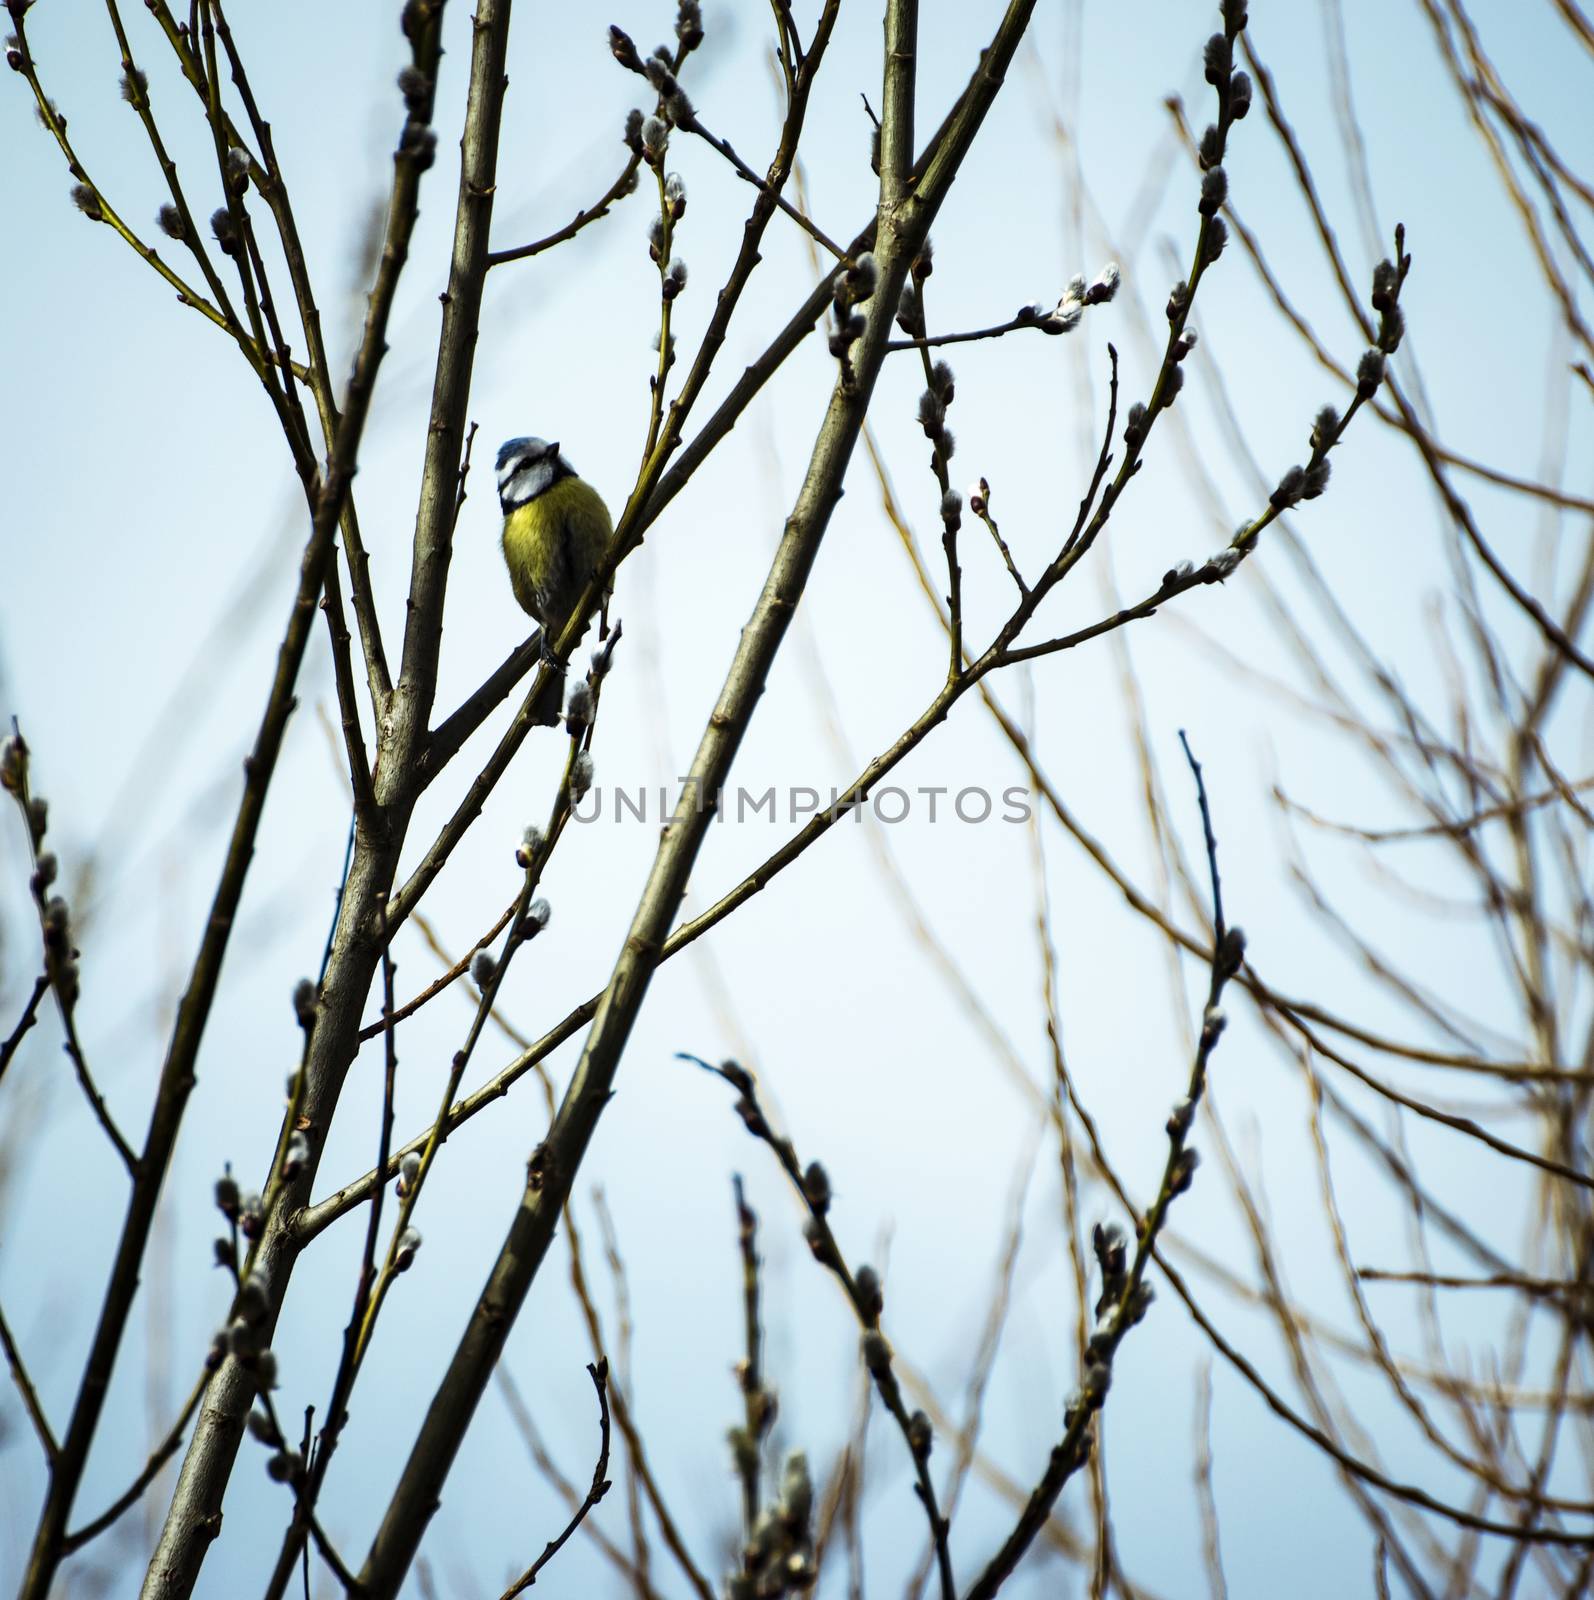 Titmouse on branches of willow by Ahojdoma